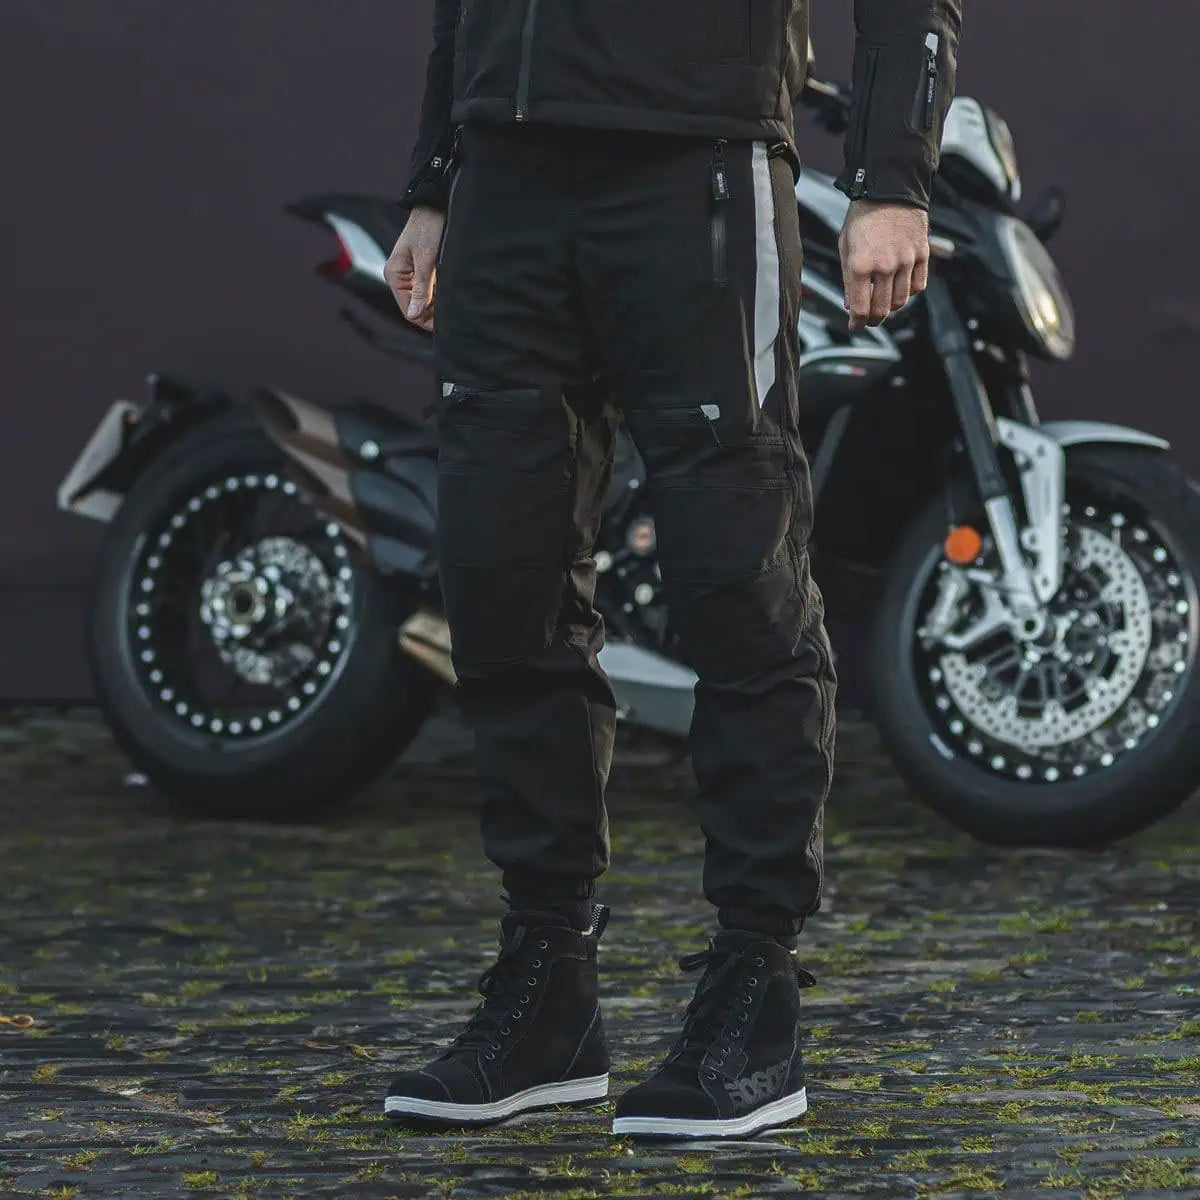 The Spada Commute trousers combine both style and function. Constructed from softshell backed by a waterproof membrane, these lightweight trousers are great for riders who want something more casual 